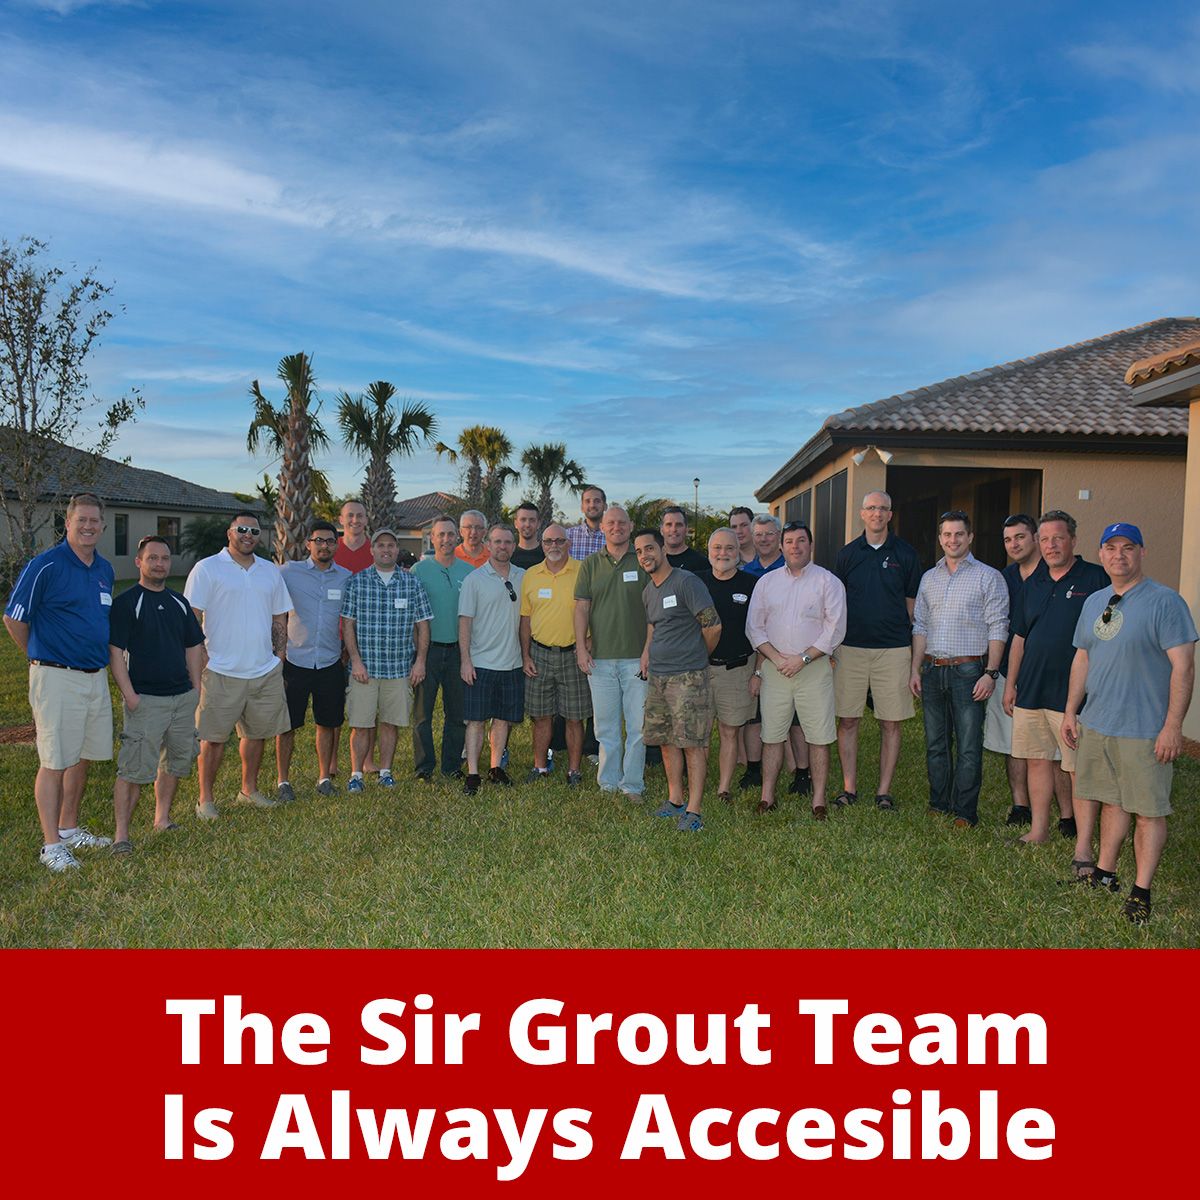 The Sir Grout Team Is Always Accesible